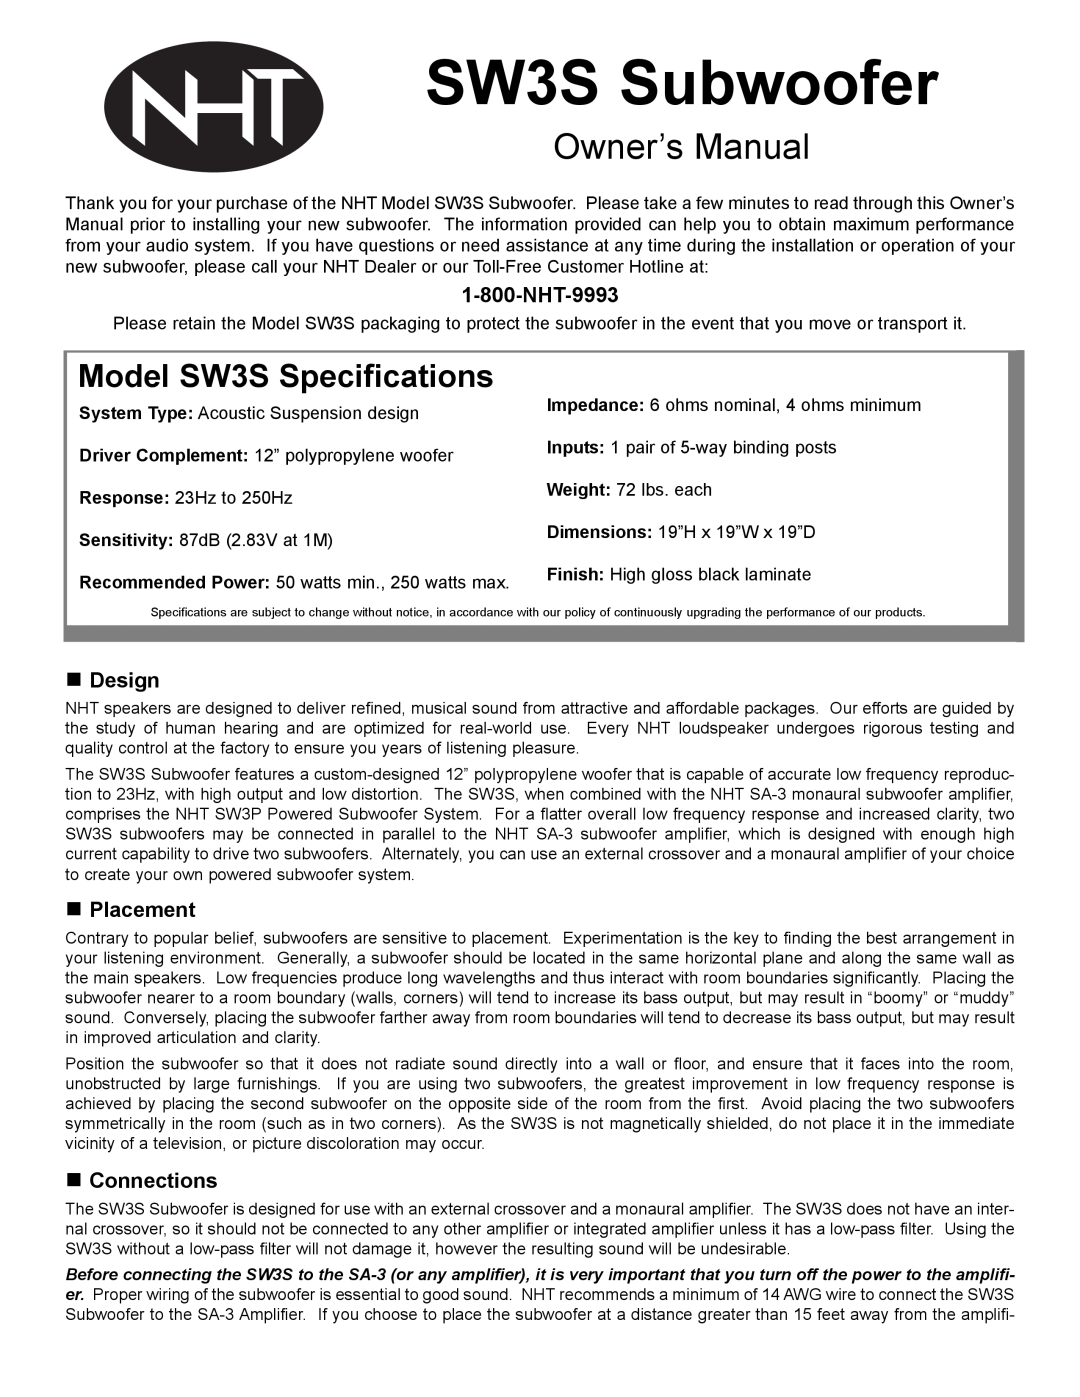 NHT owner manual „Design, „Placement, „Connections, SW3S Subwoofer, Model SW3S Specifications 